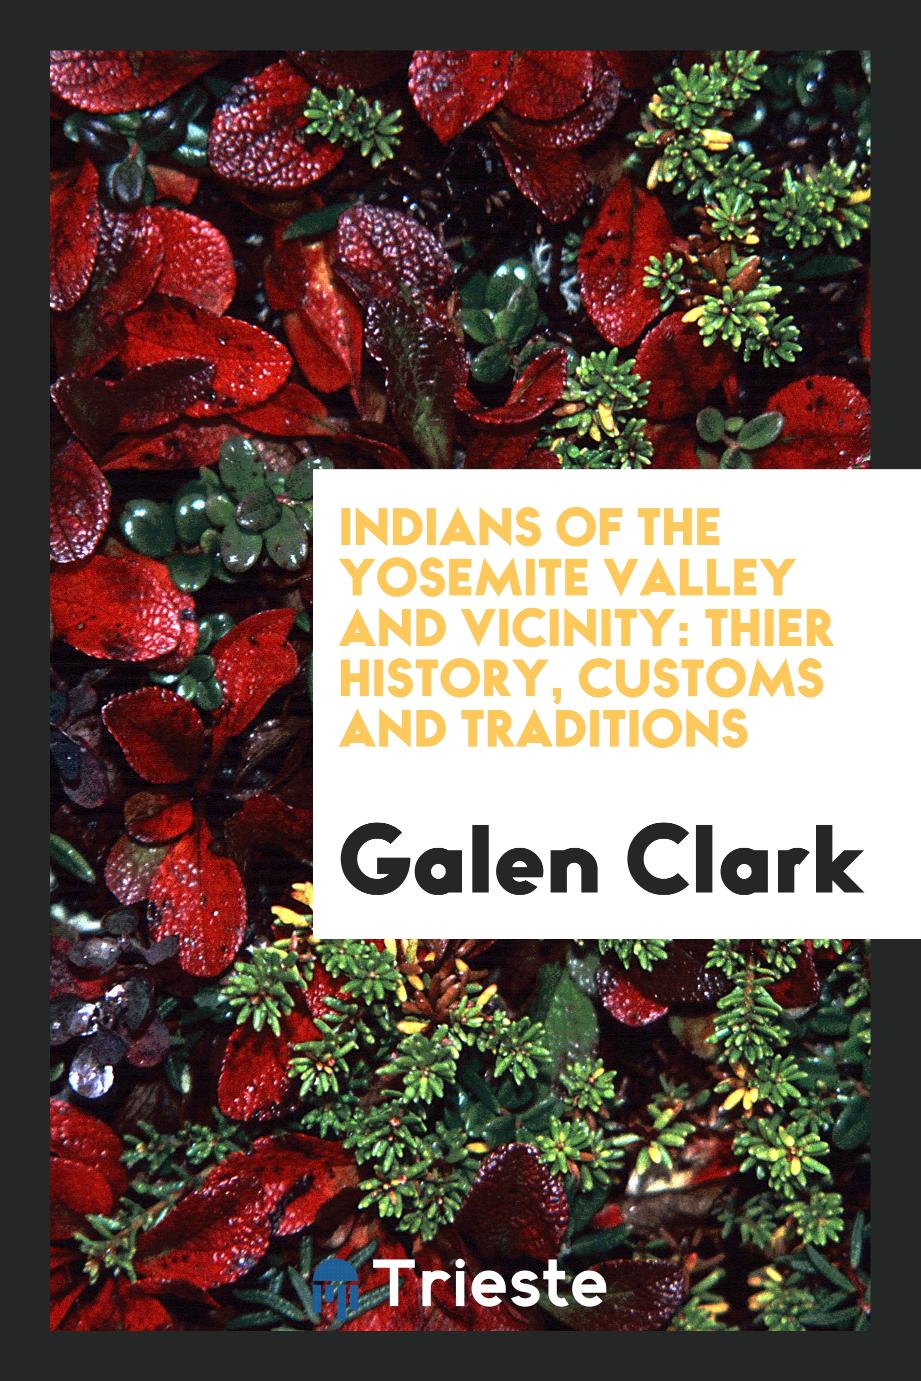 Indians of the Yosemite Valley and vicinity: thier history, customs and traditions